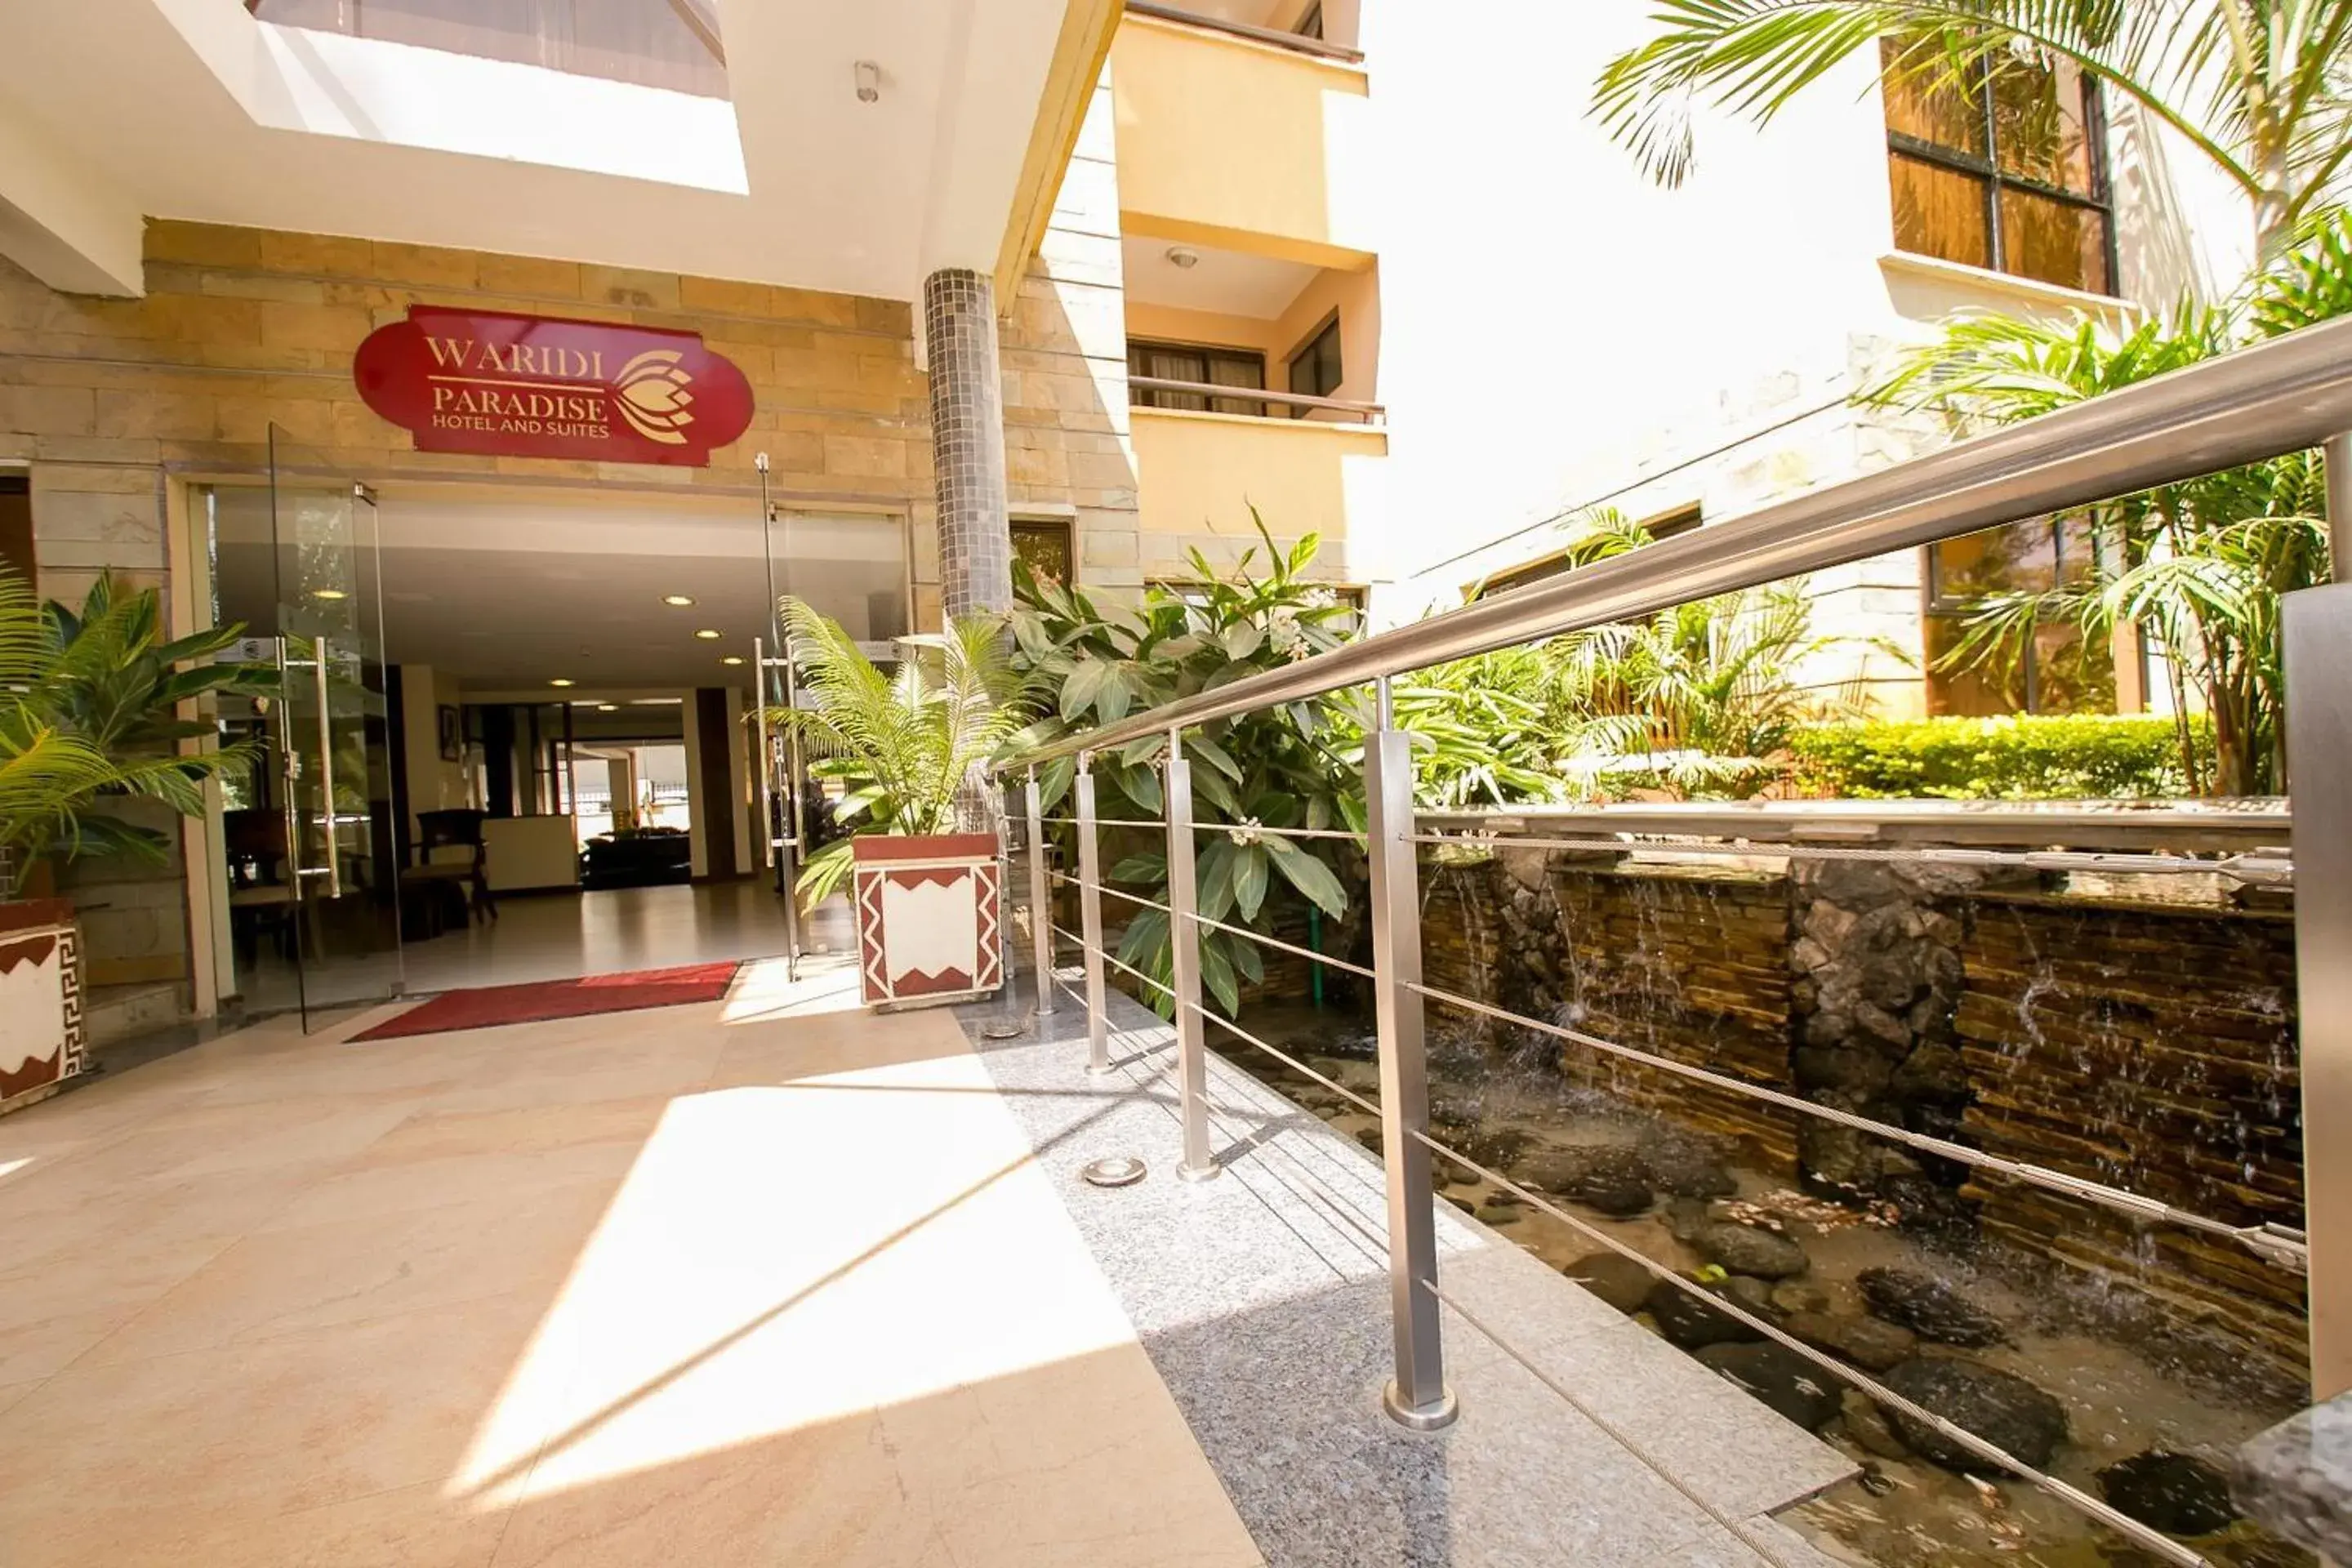 Facade/entrance in Waridi Paradise Hotel and Suites